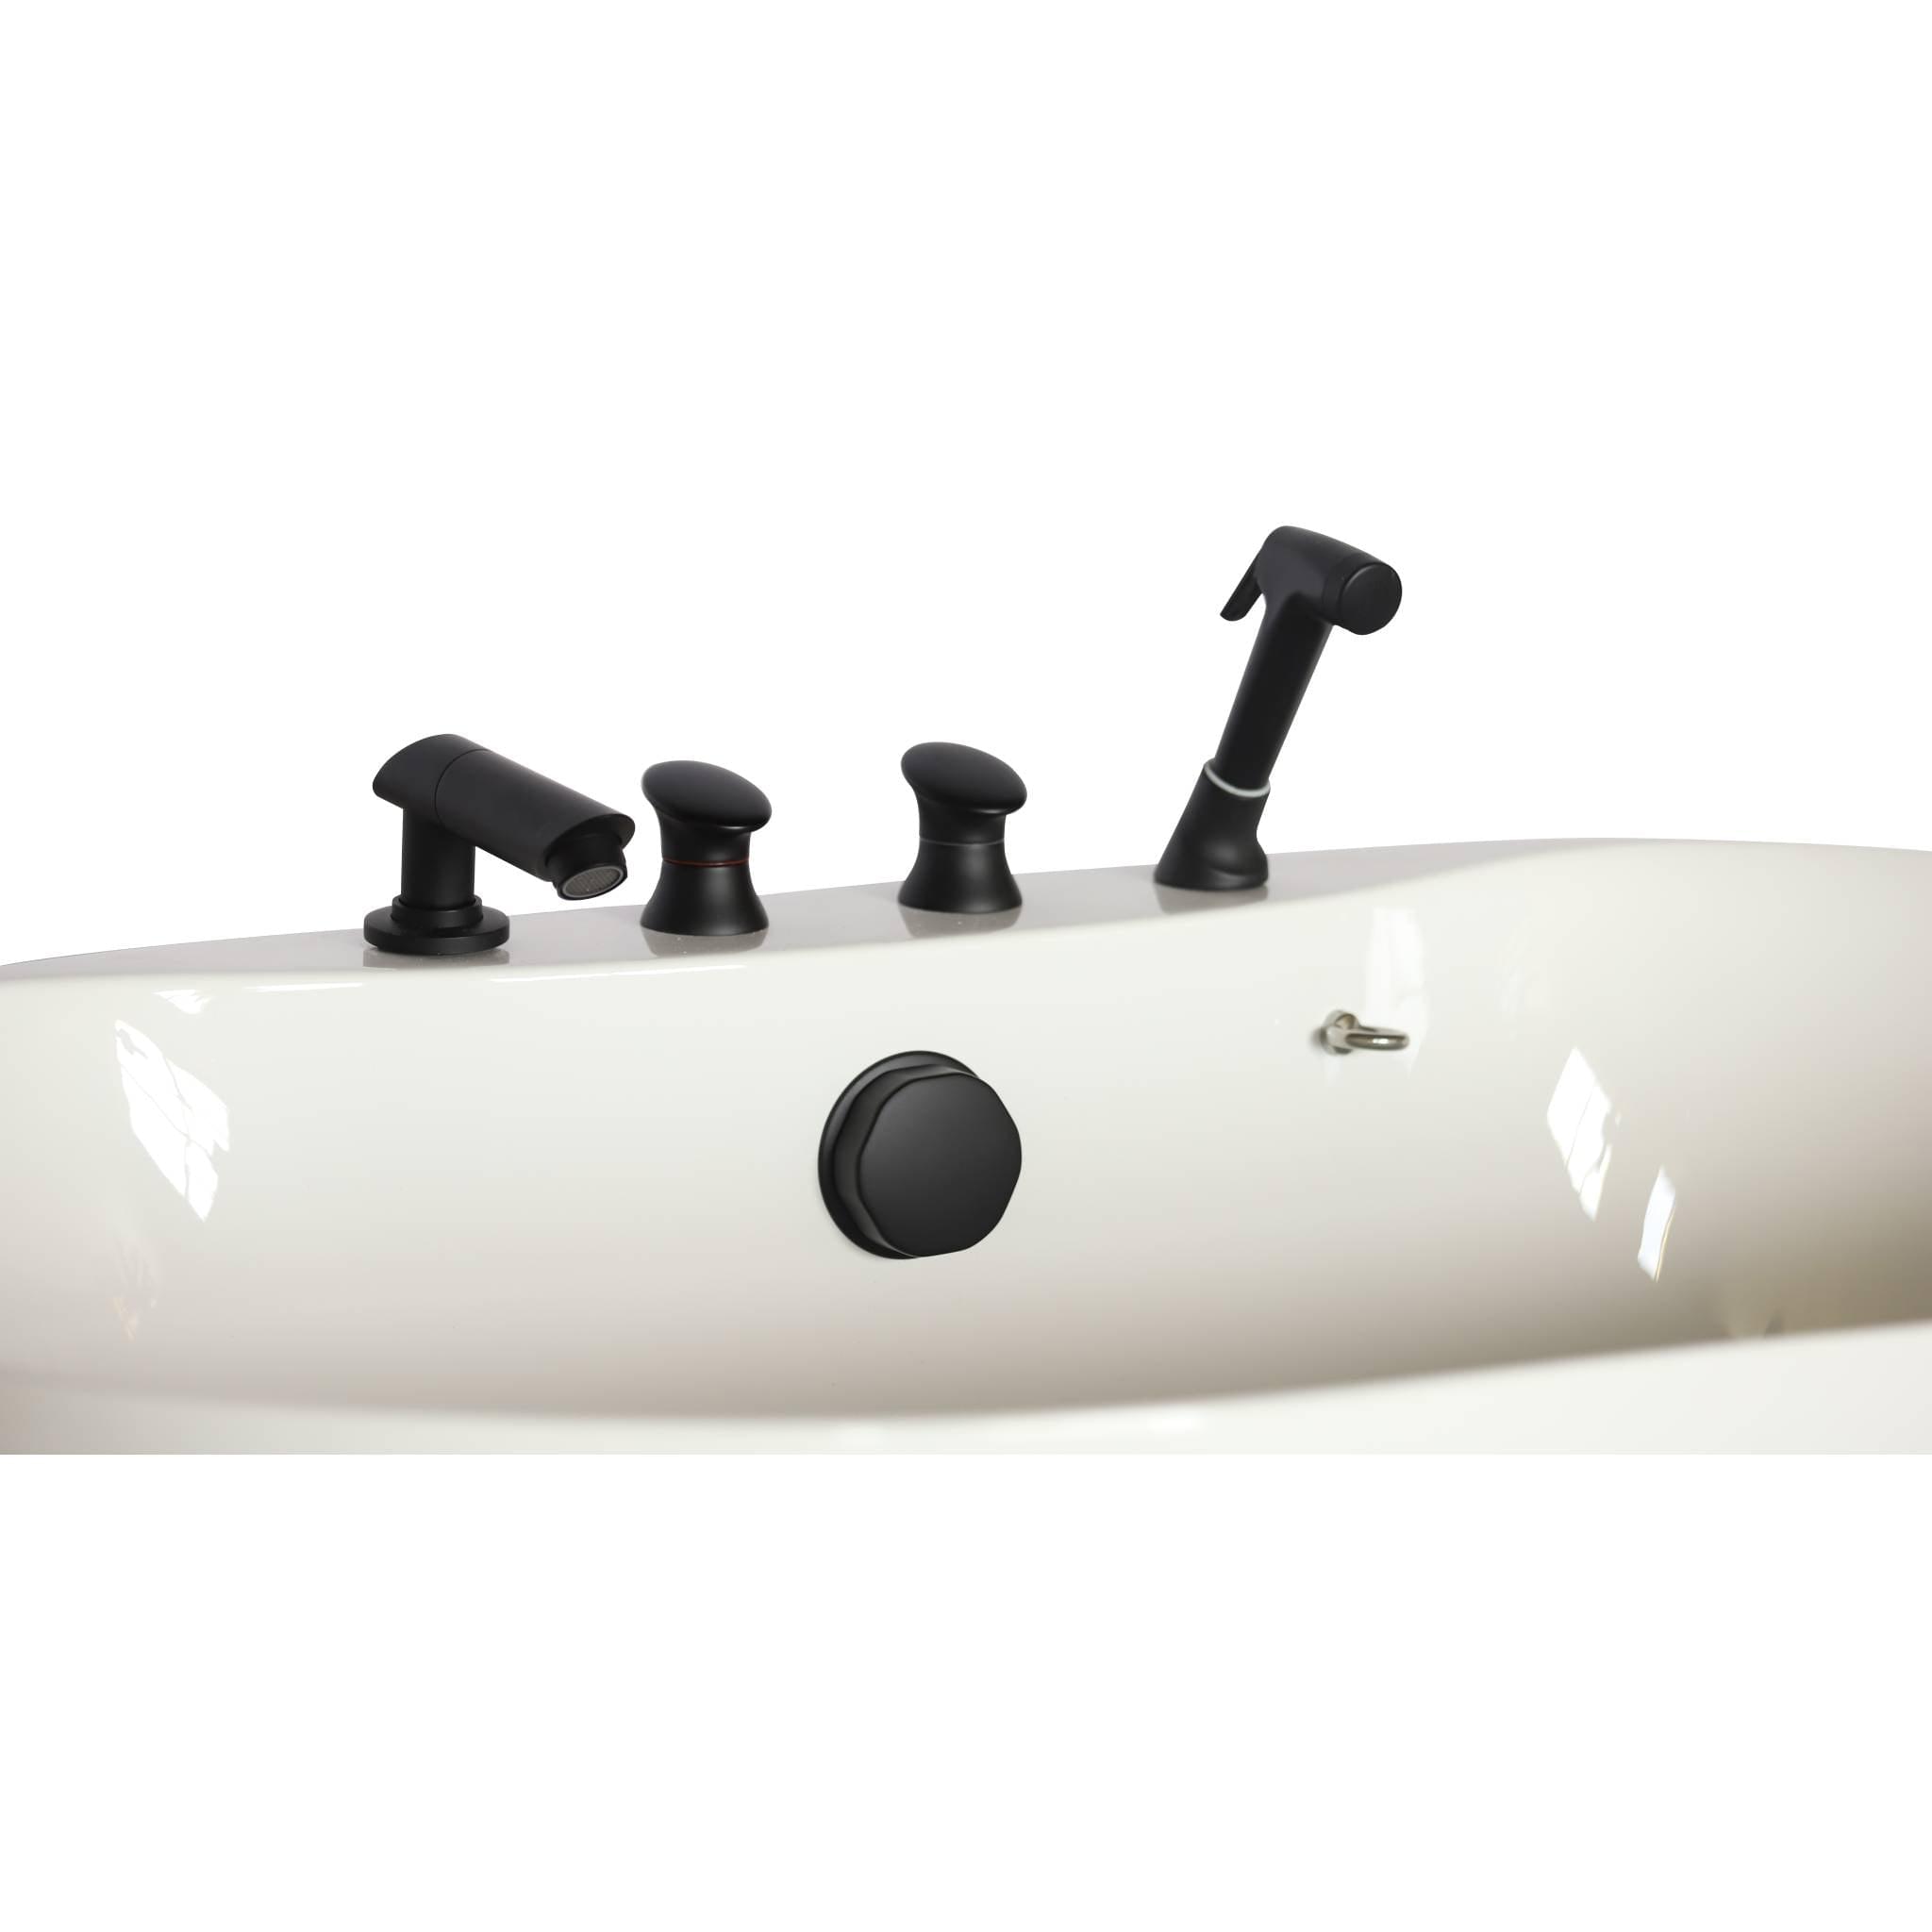 Acrylic Dog Bathing Tub with Faucet and Sprayer Kit